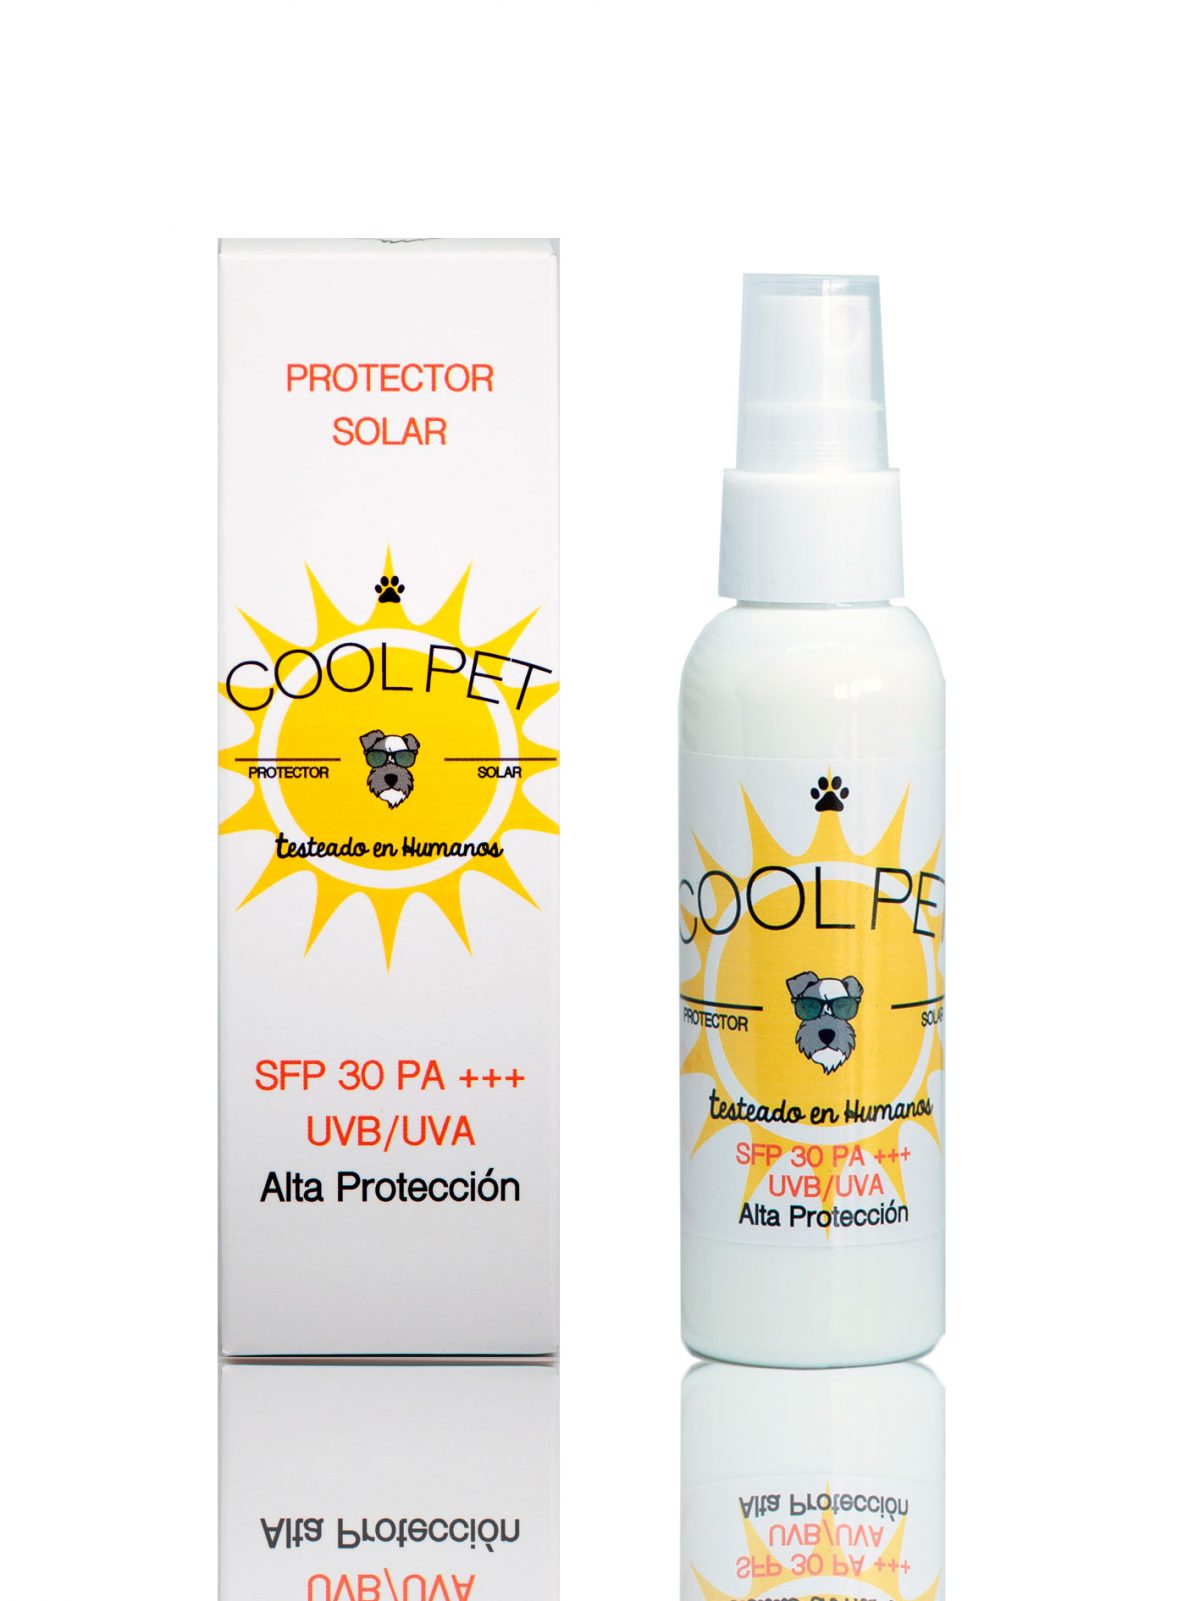 coolpet protector solar